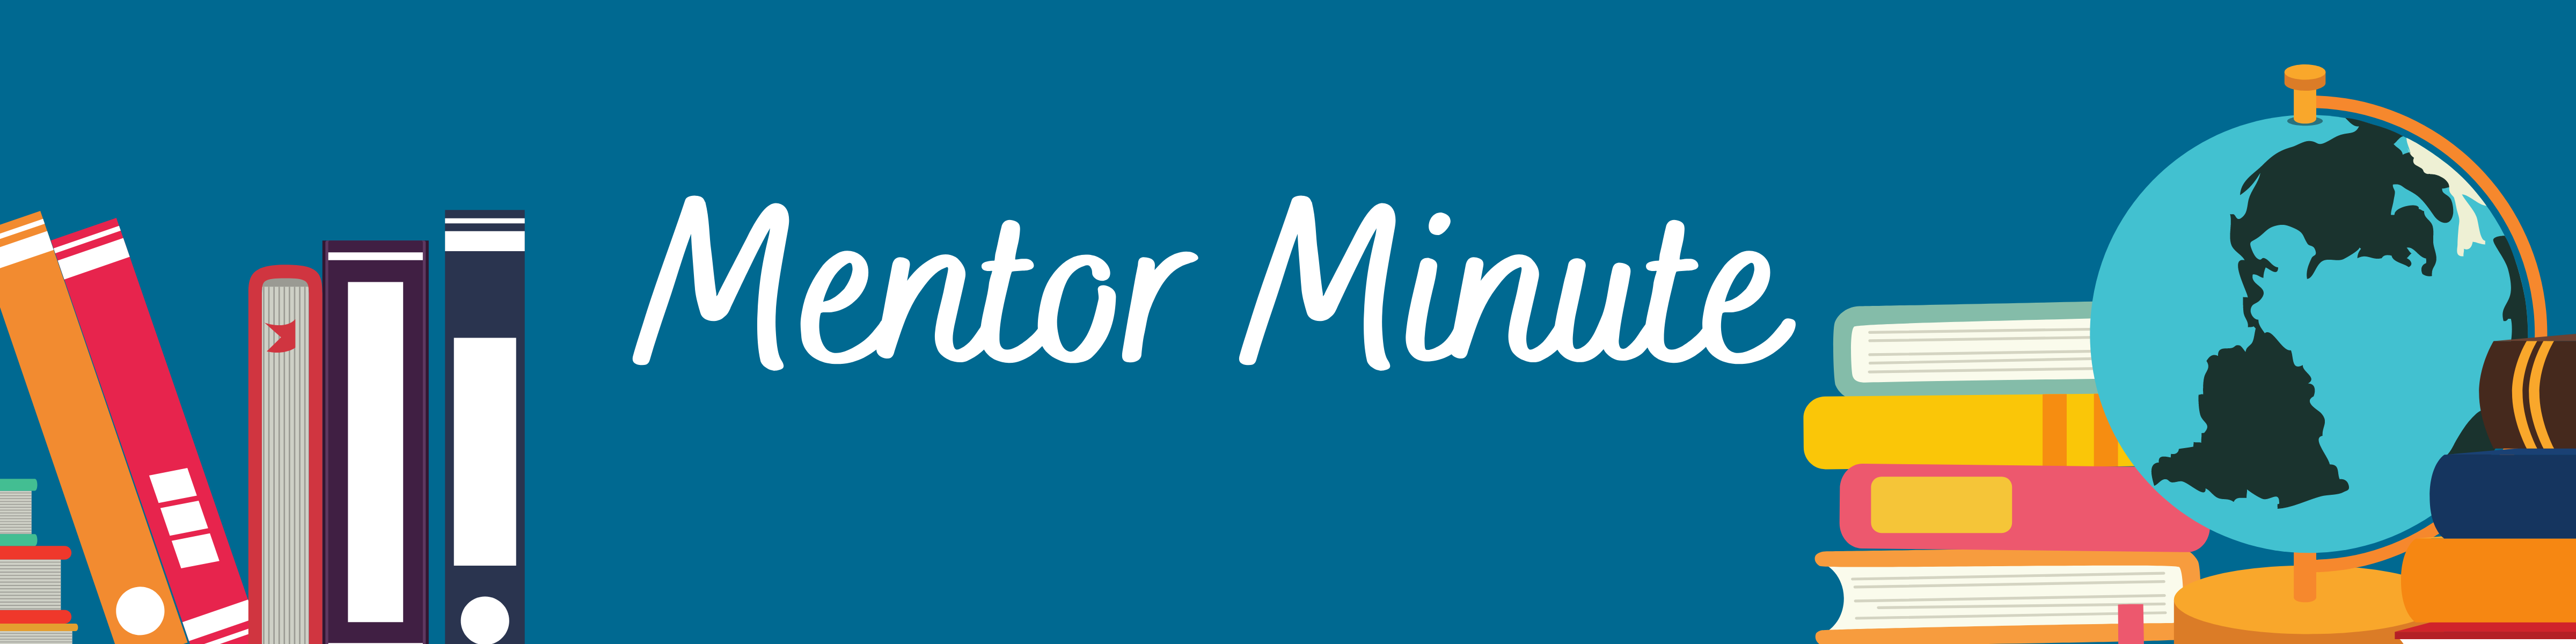 Mentor Minute 